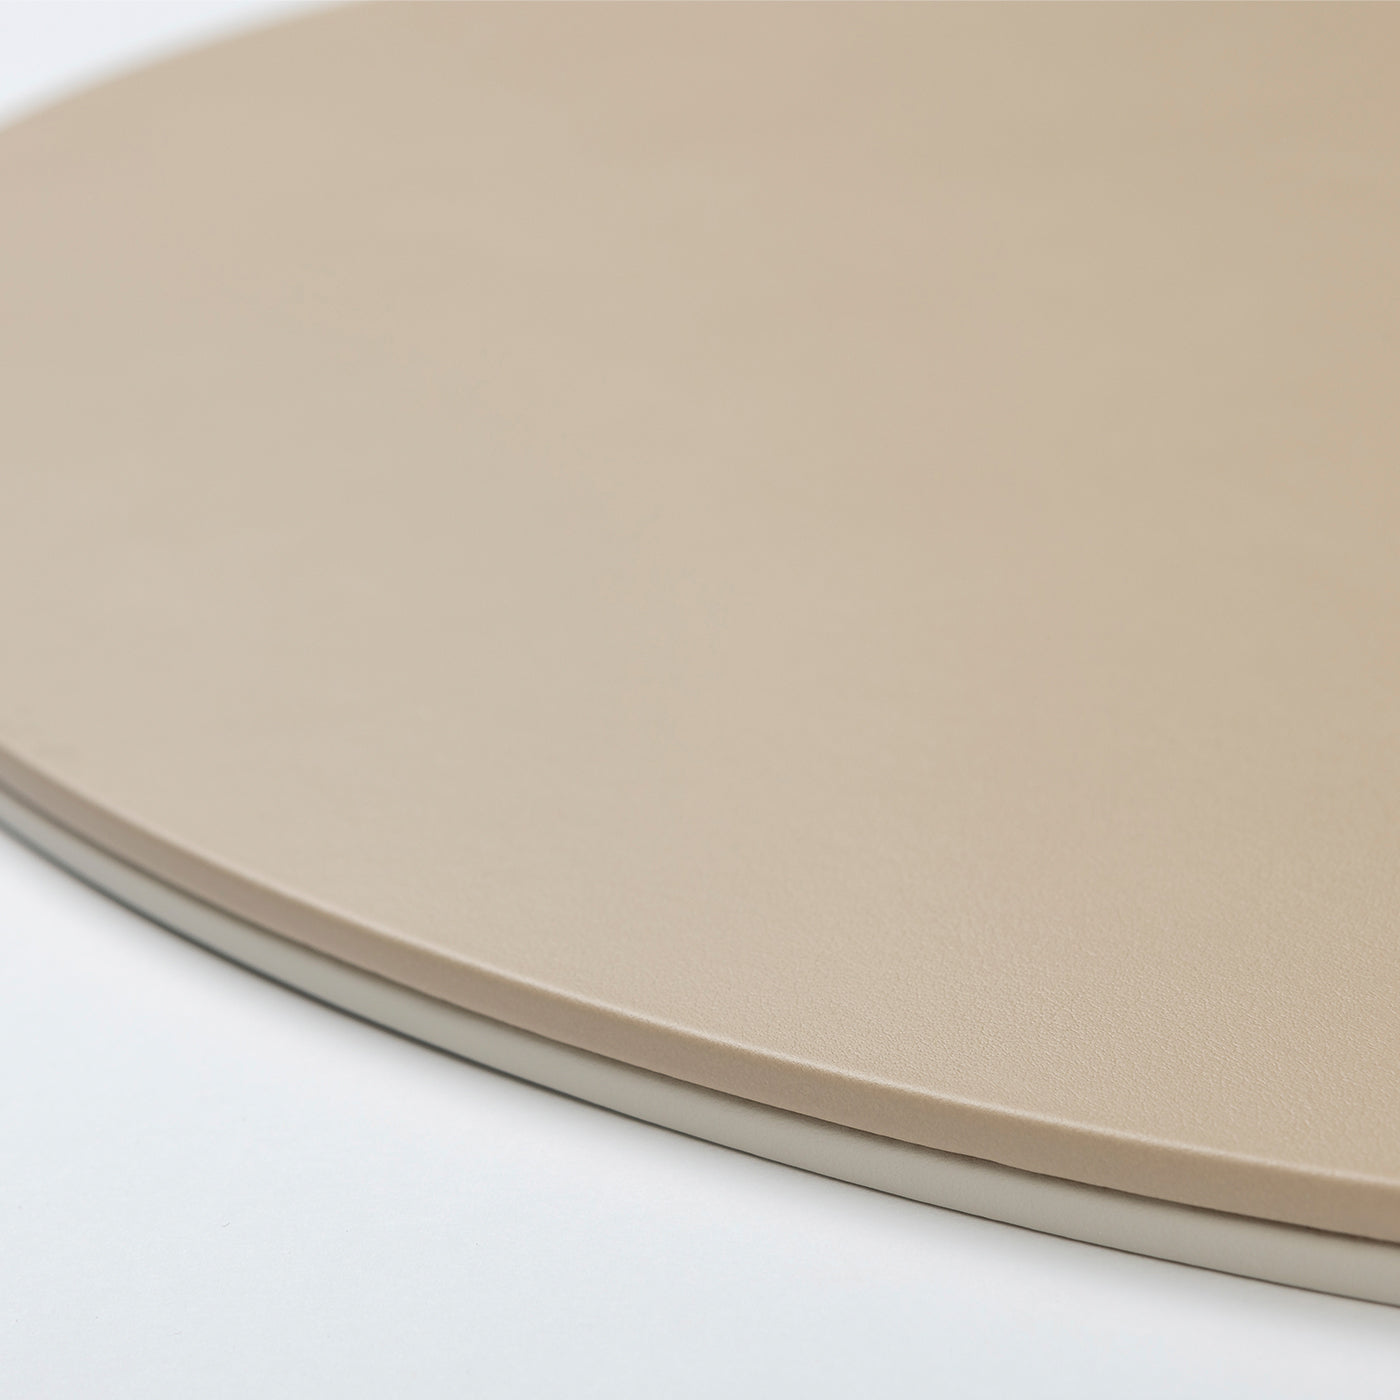 Mondrian Capuccino Beige and Luna White Oval Placemat - Alternative view 2